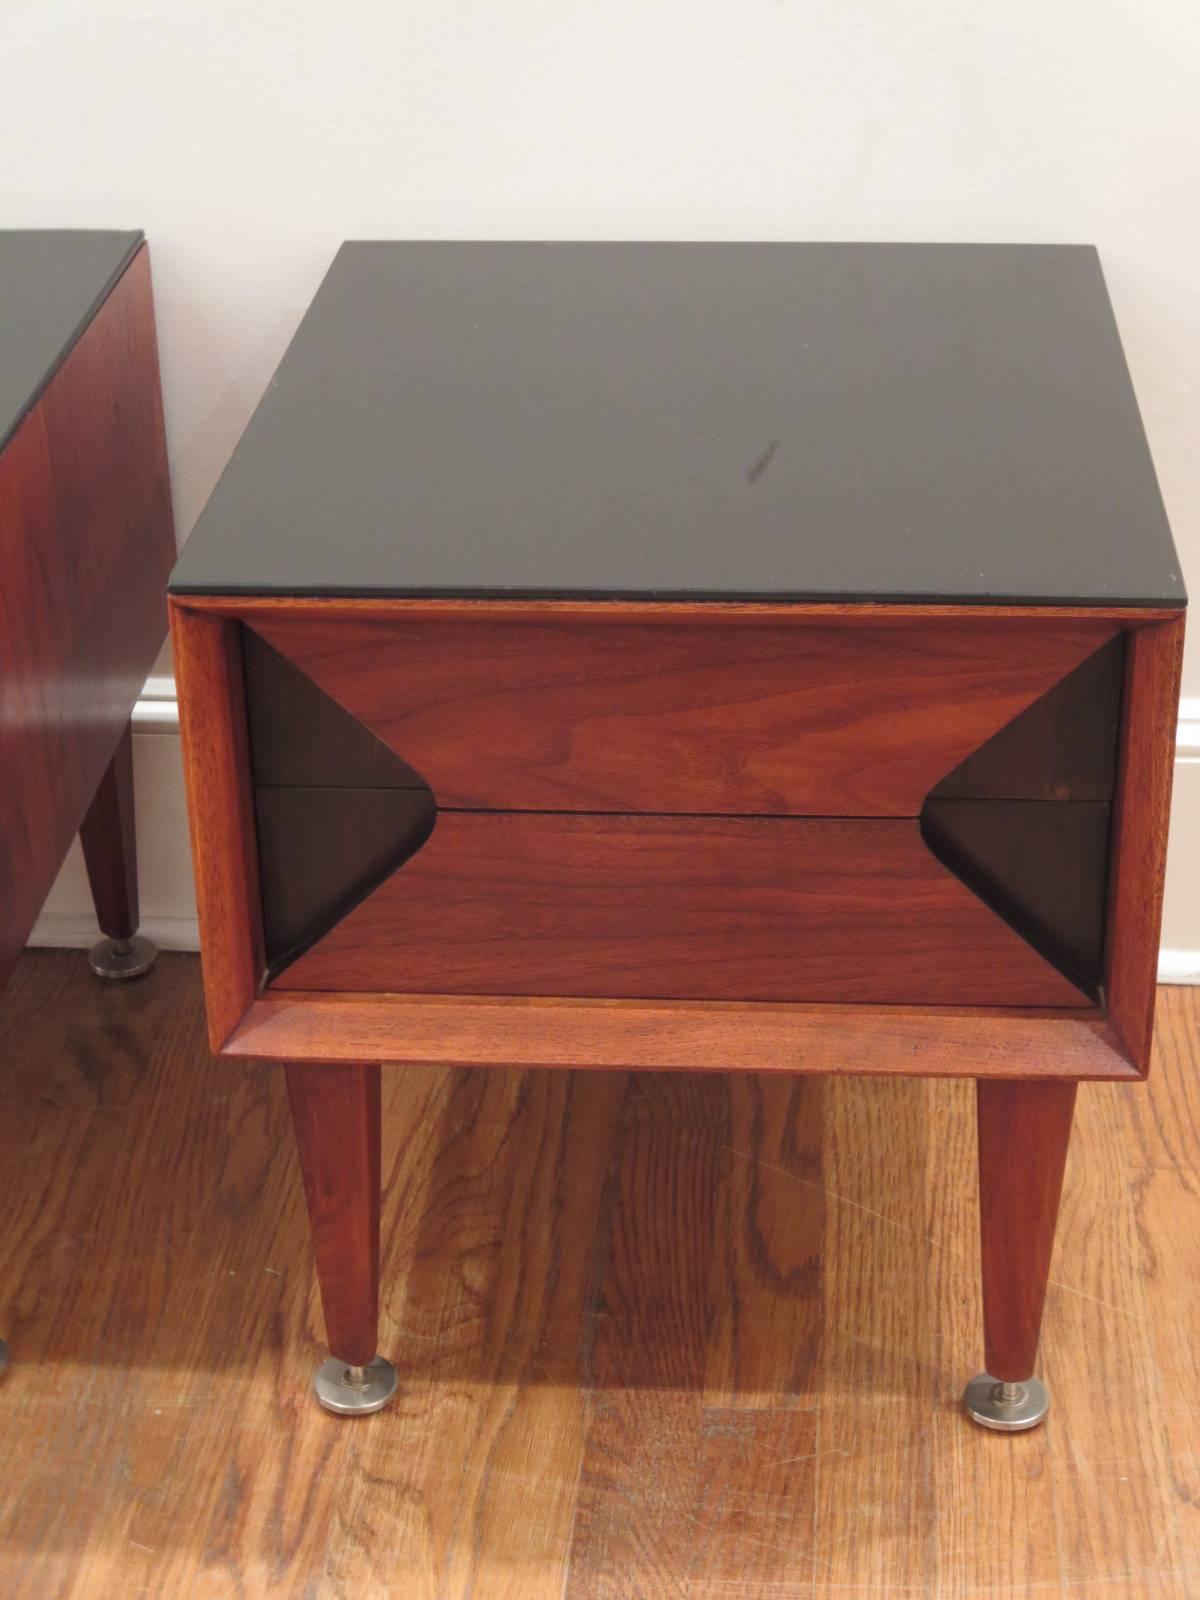 Pair of walnut night or end tables designed by Marc Berge. Black glass tops. Excellent condition.